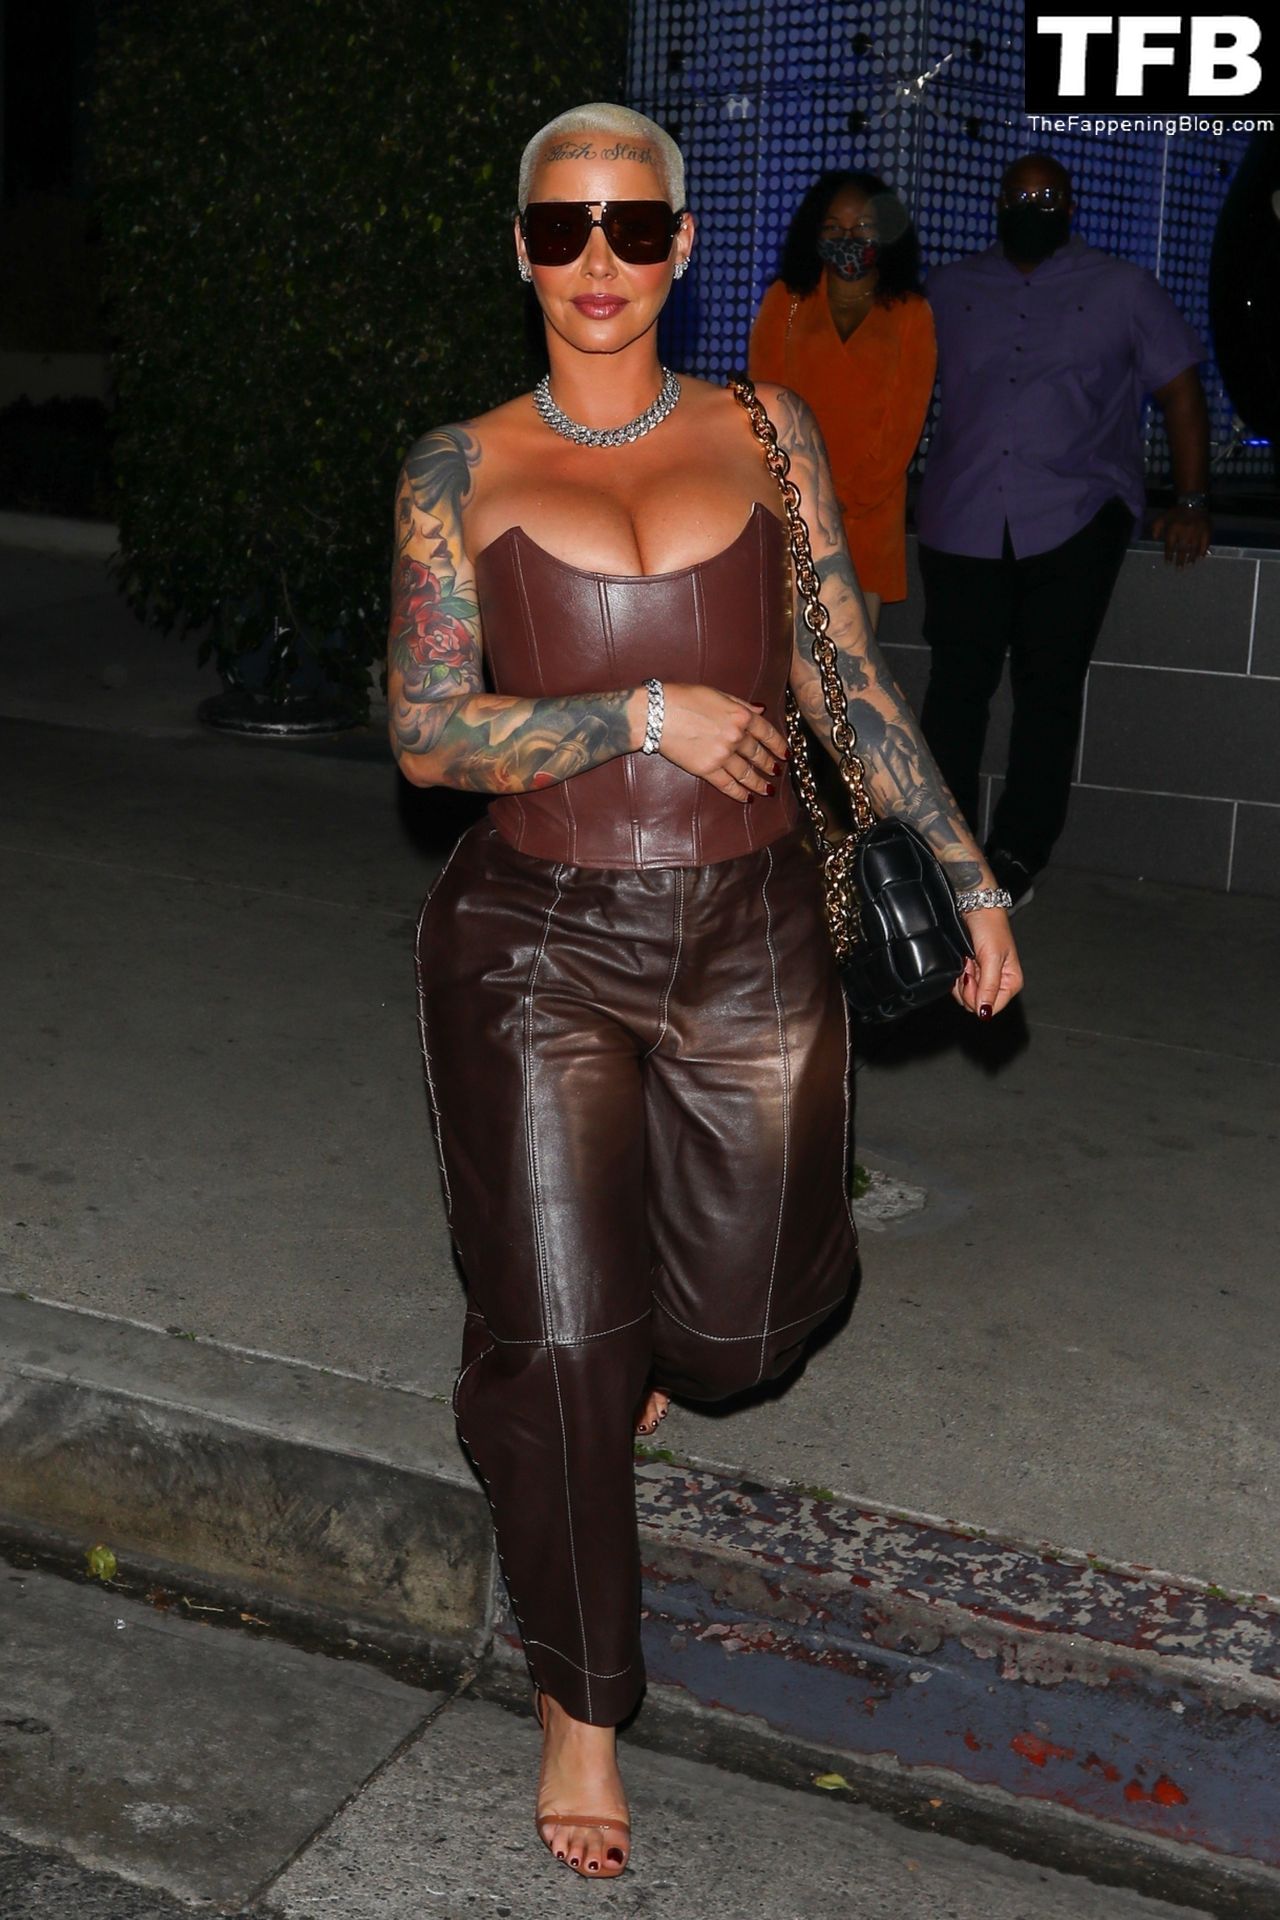 Amber-Rose-Sexy-The-Fappening-Blog-26.jpg